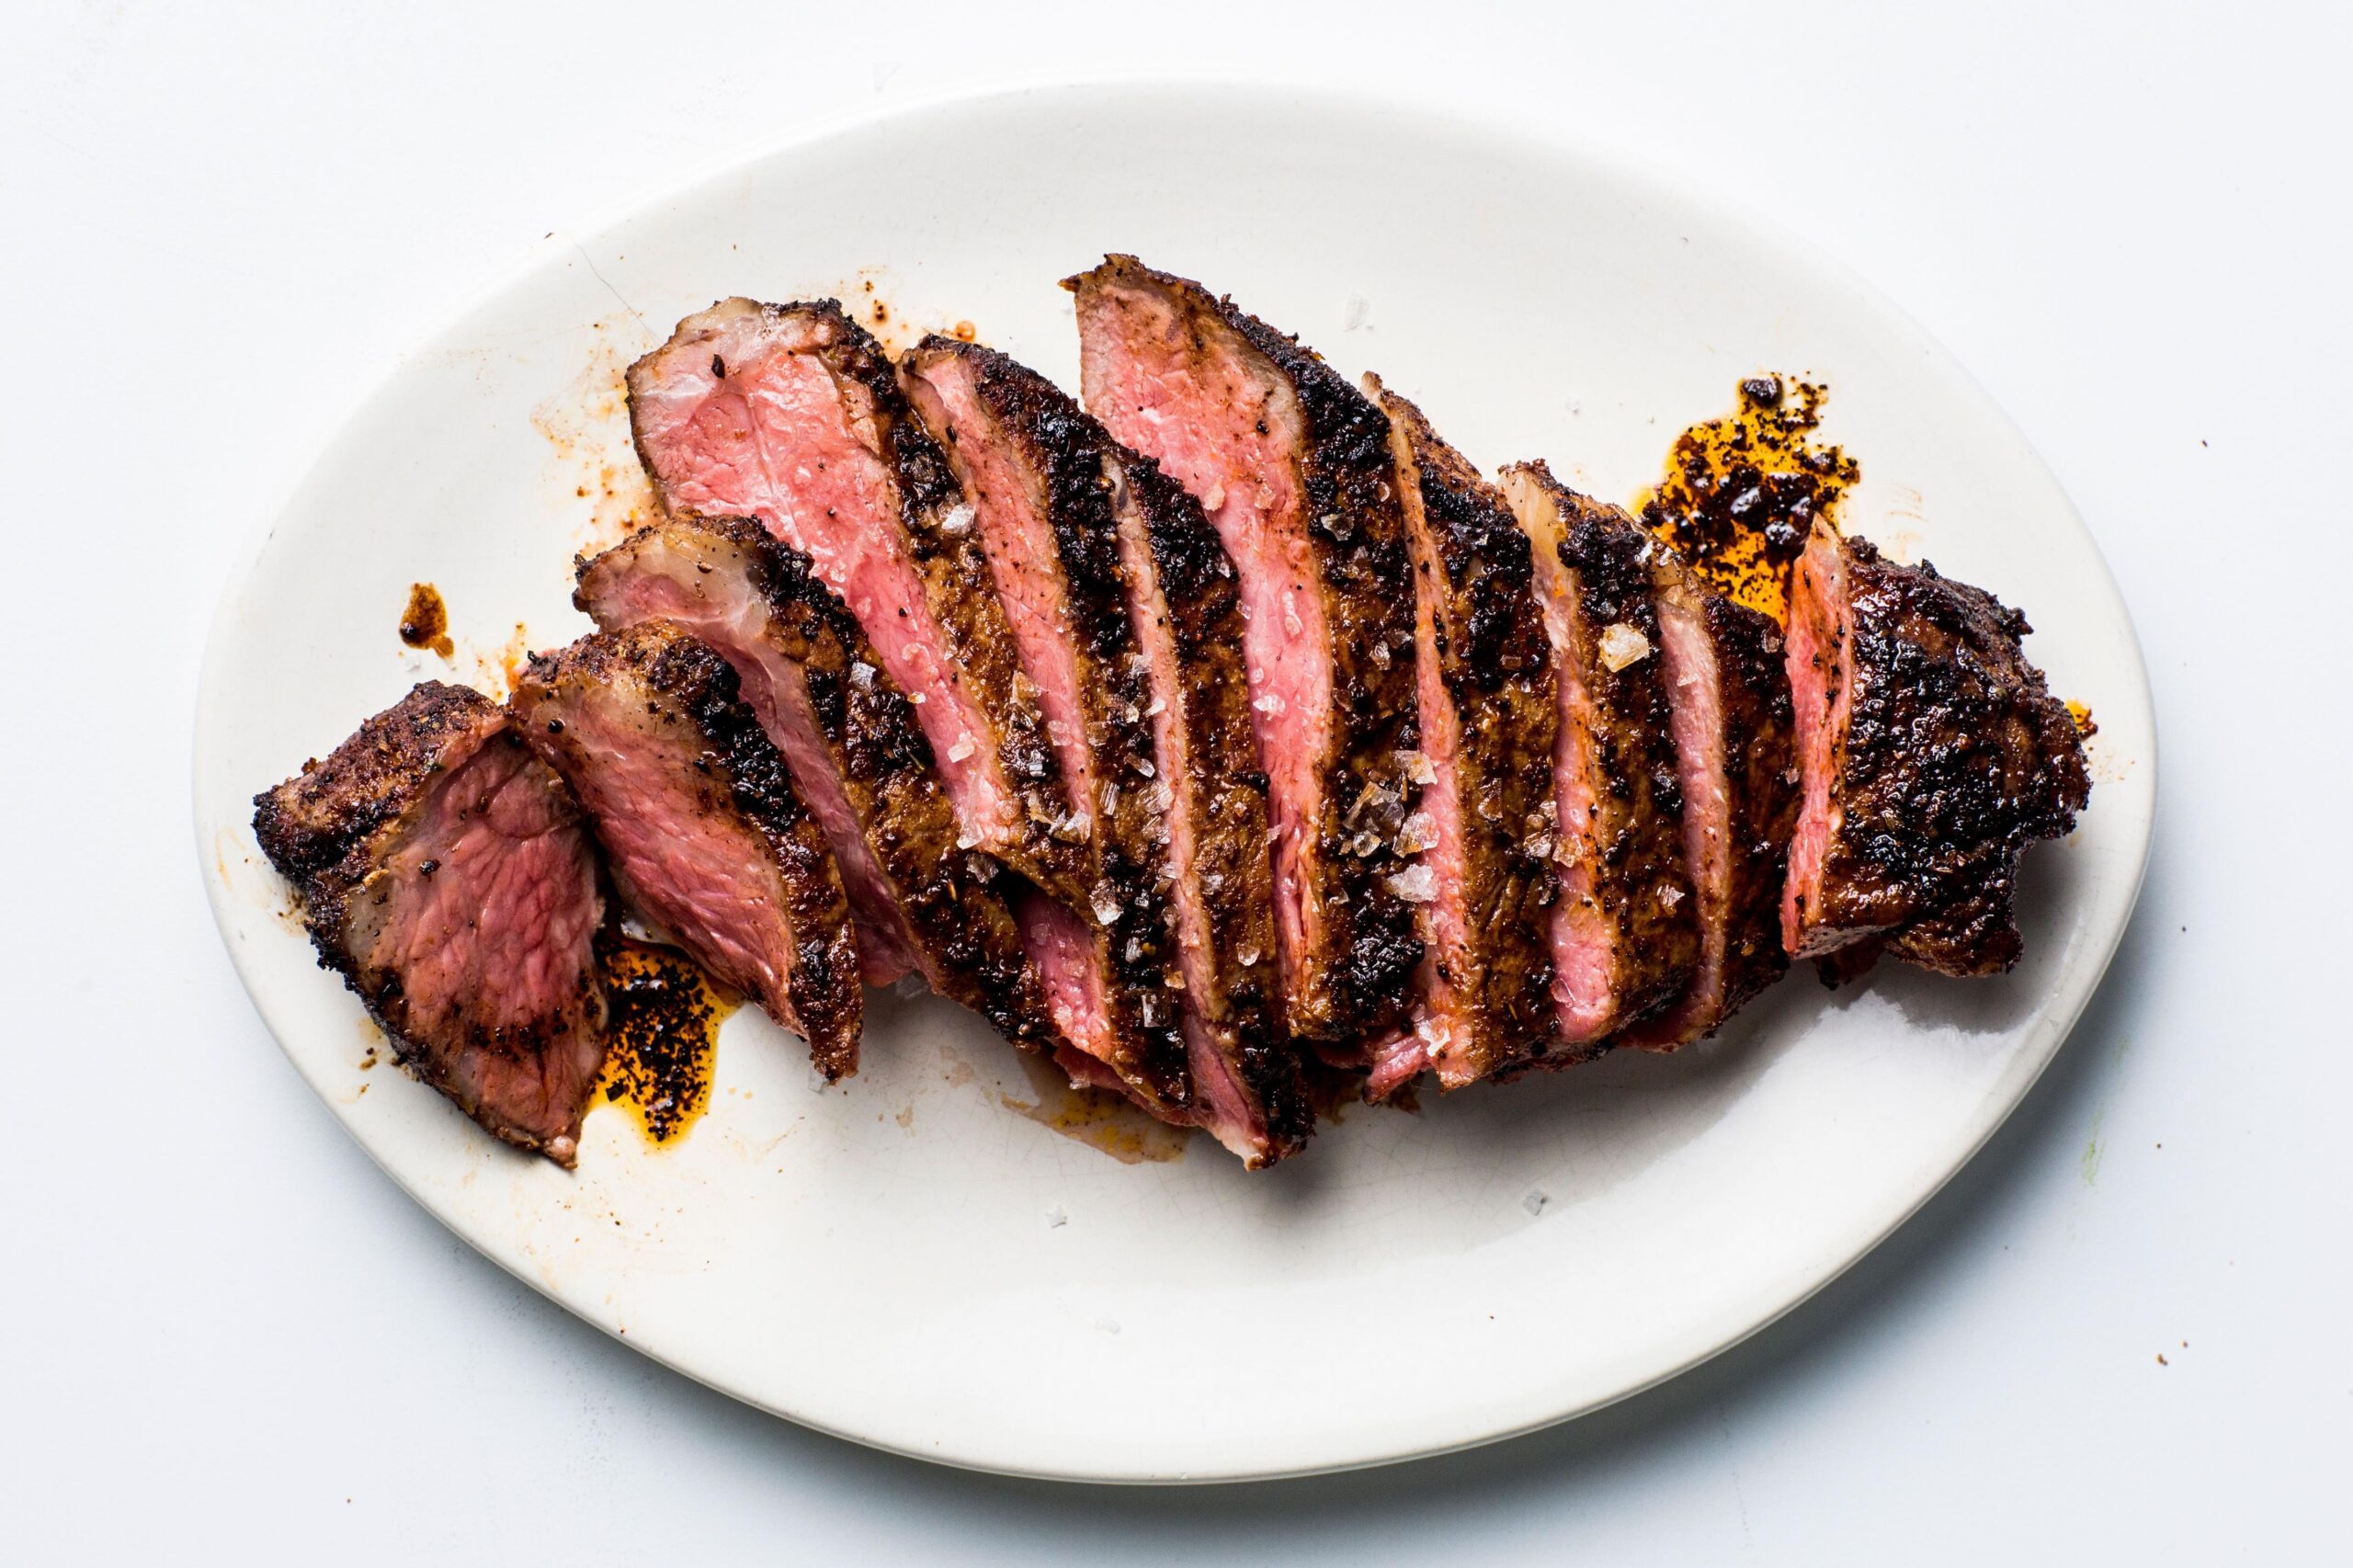  Give your steak a caffeine boost with this rub.